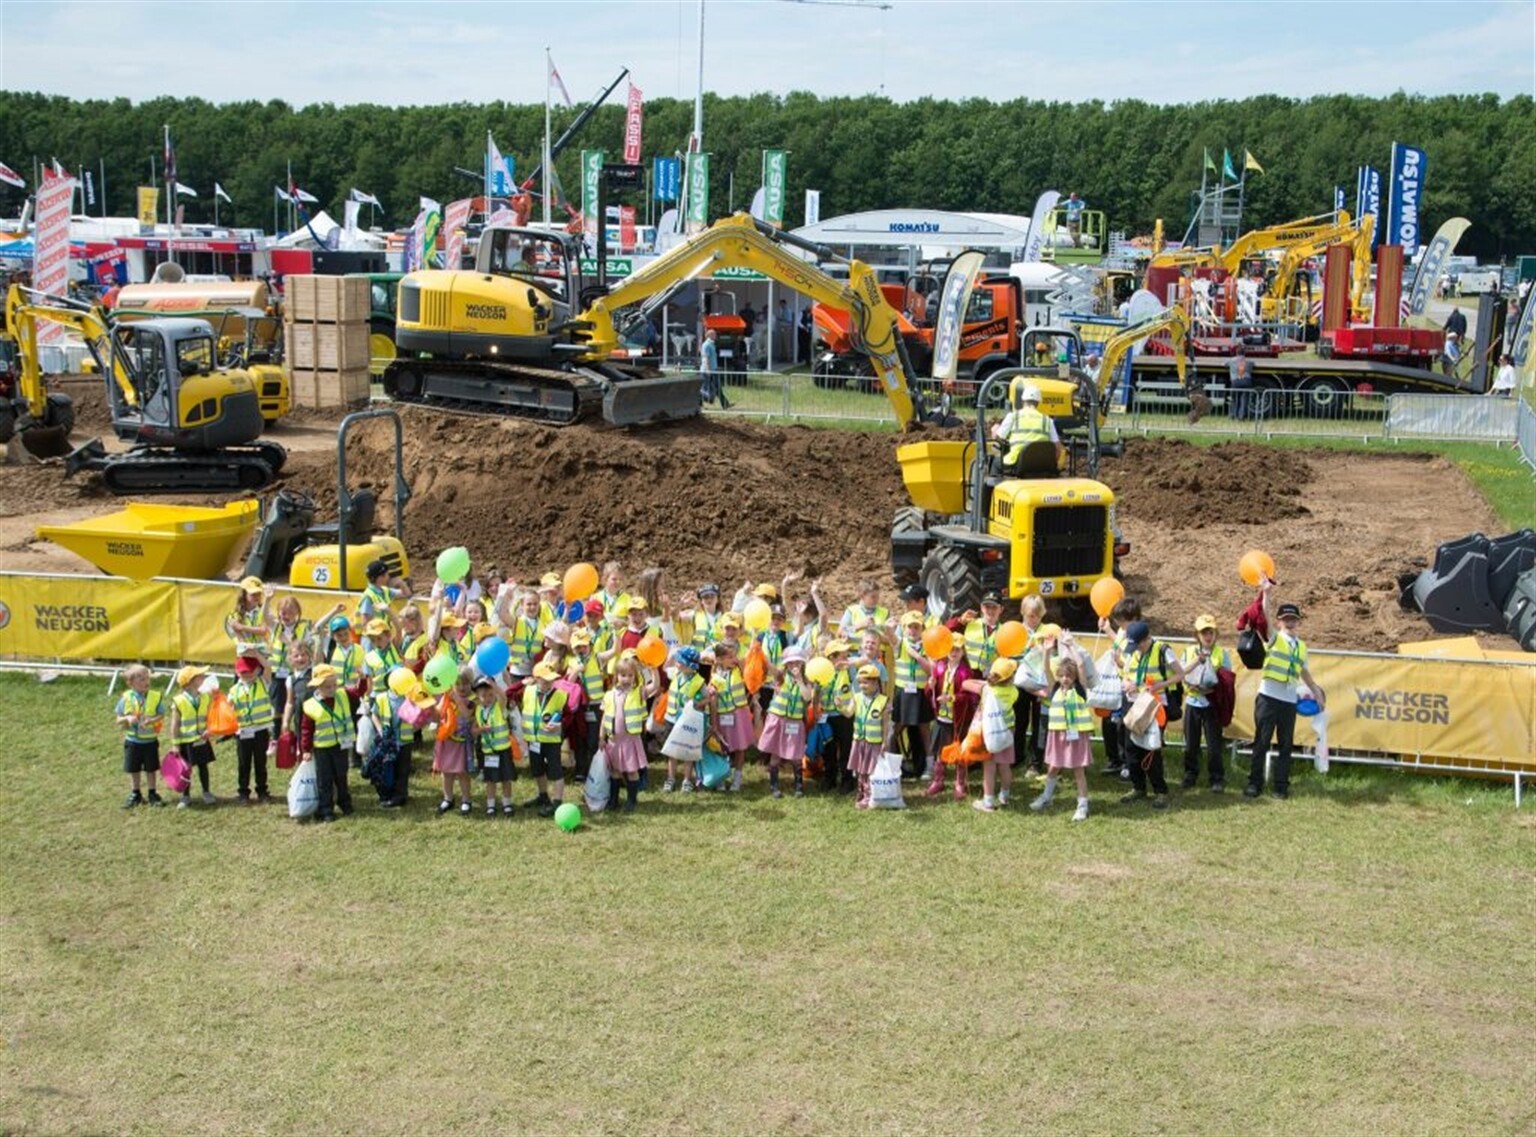 Student Day at Plantworx Construction Exhibition (Addressing the Skills Gap)